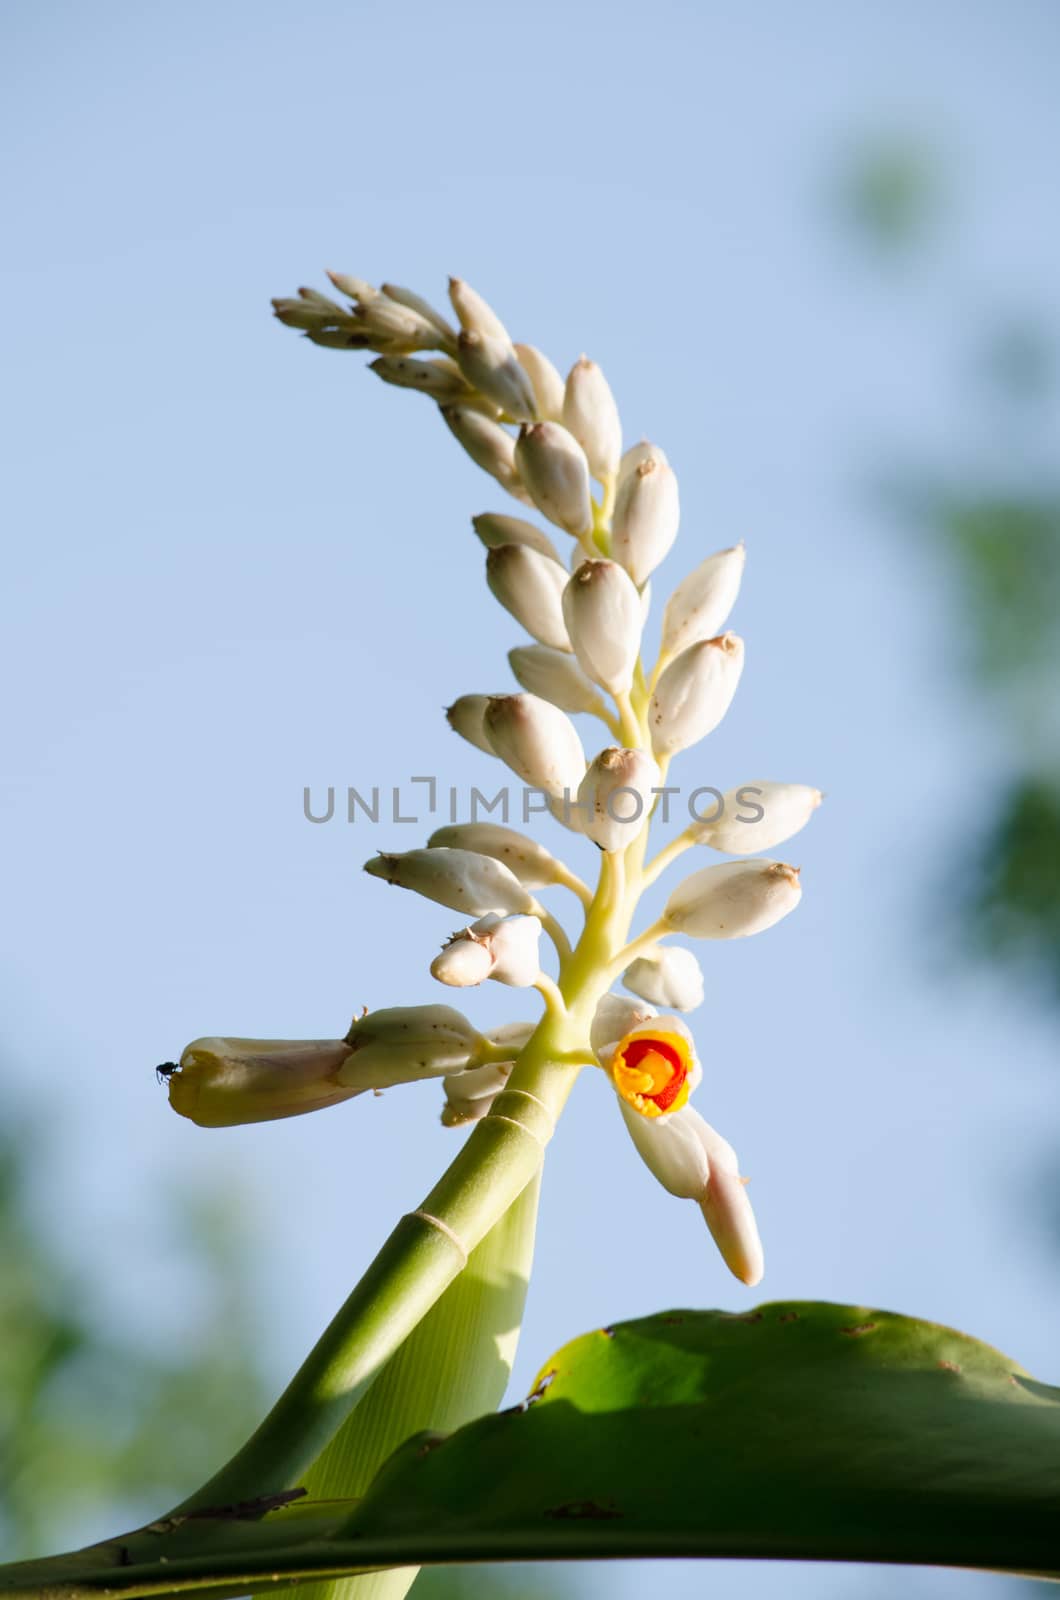 Alpinia is a genus of flowering plants in the ginger family, Zingiberaceae. It is named for Prospero Alpini,
Species are native to Asia, Australia, and the Pacific Islands, where they occur in tropical and subtropical climates.